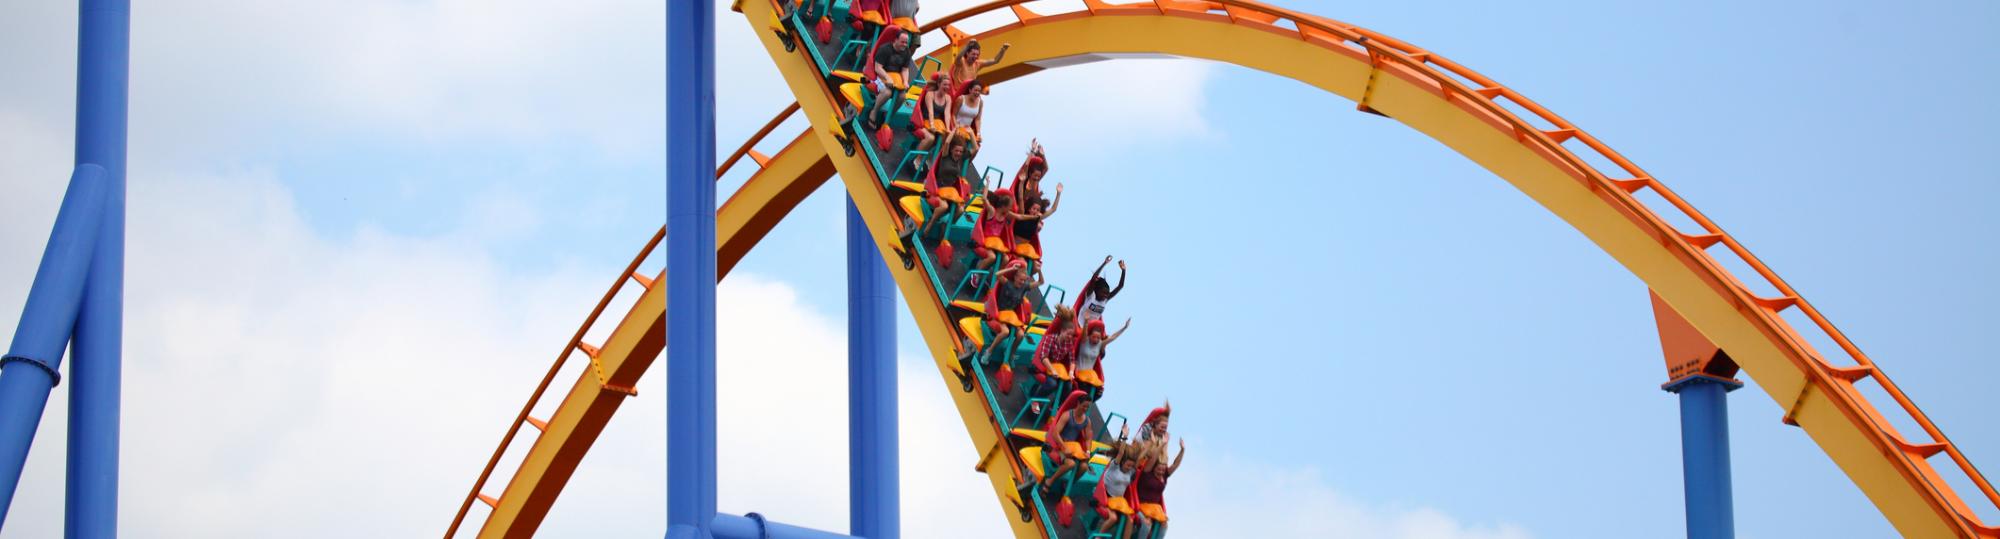 California's Great America Military Discount with Veterans Advantage